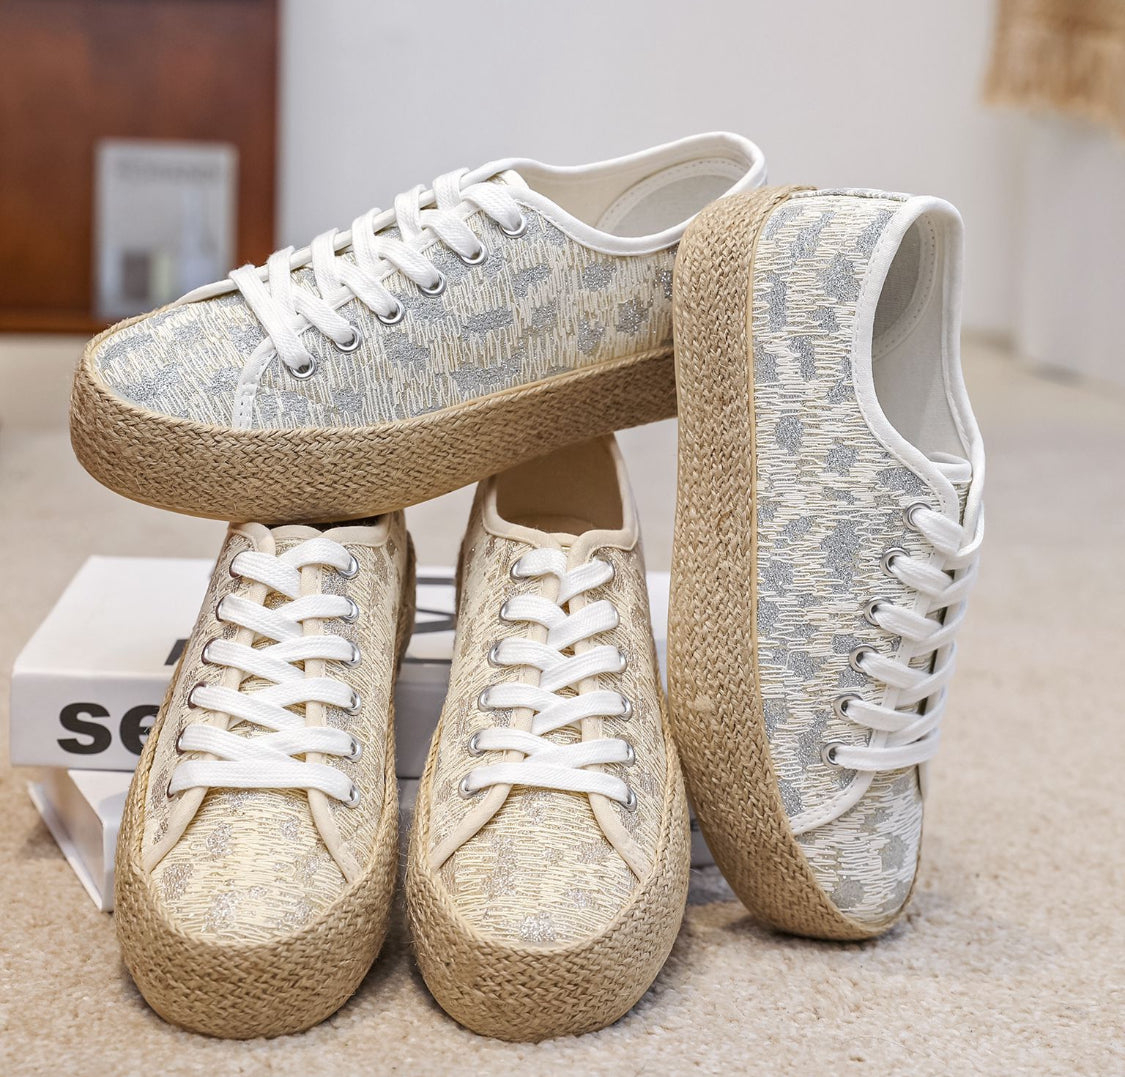 Espadrille Sparkly Woven Pumps - Metallic  (Silver or Gold)